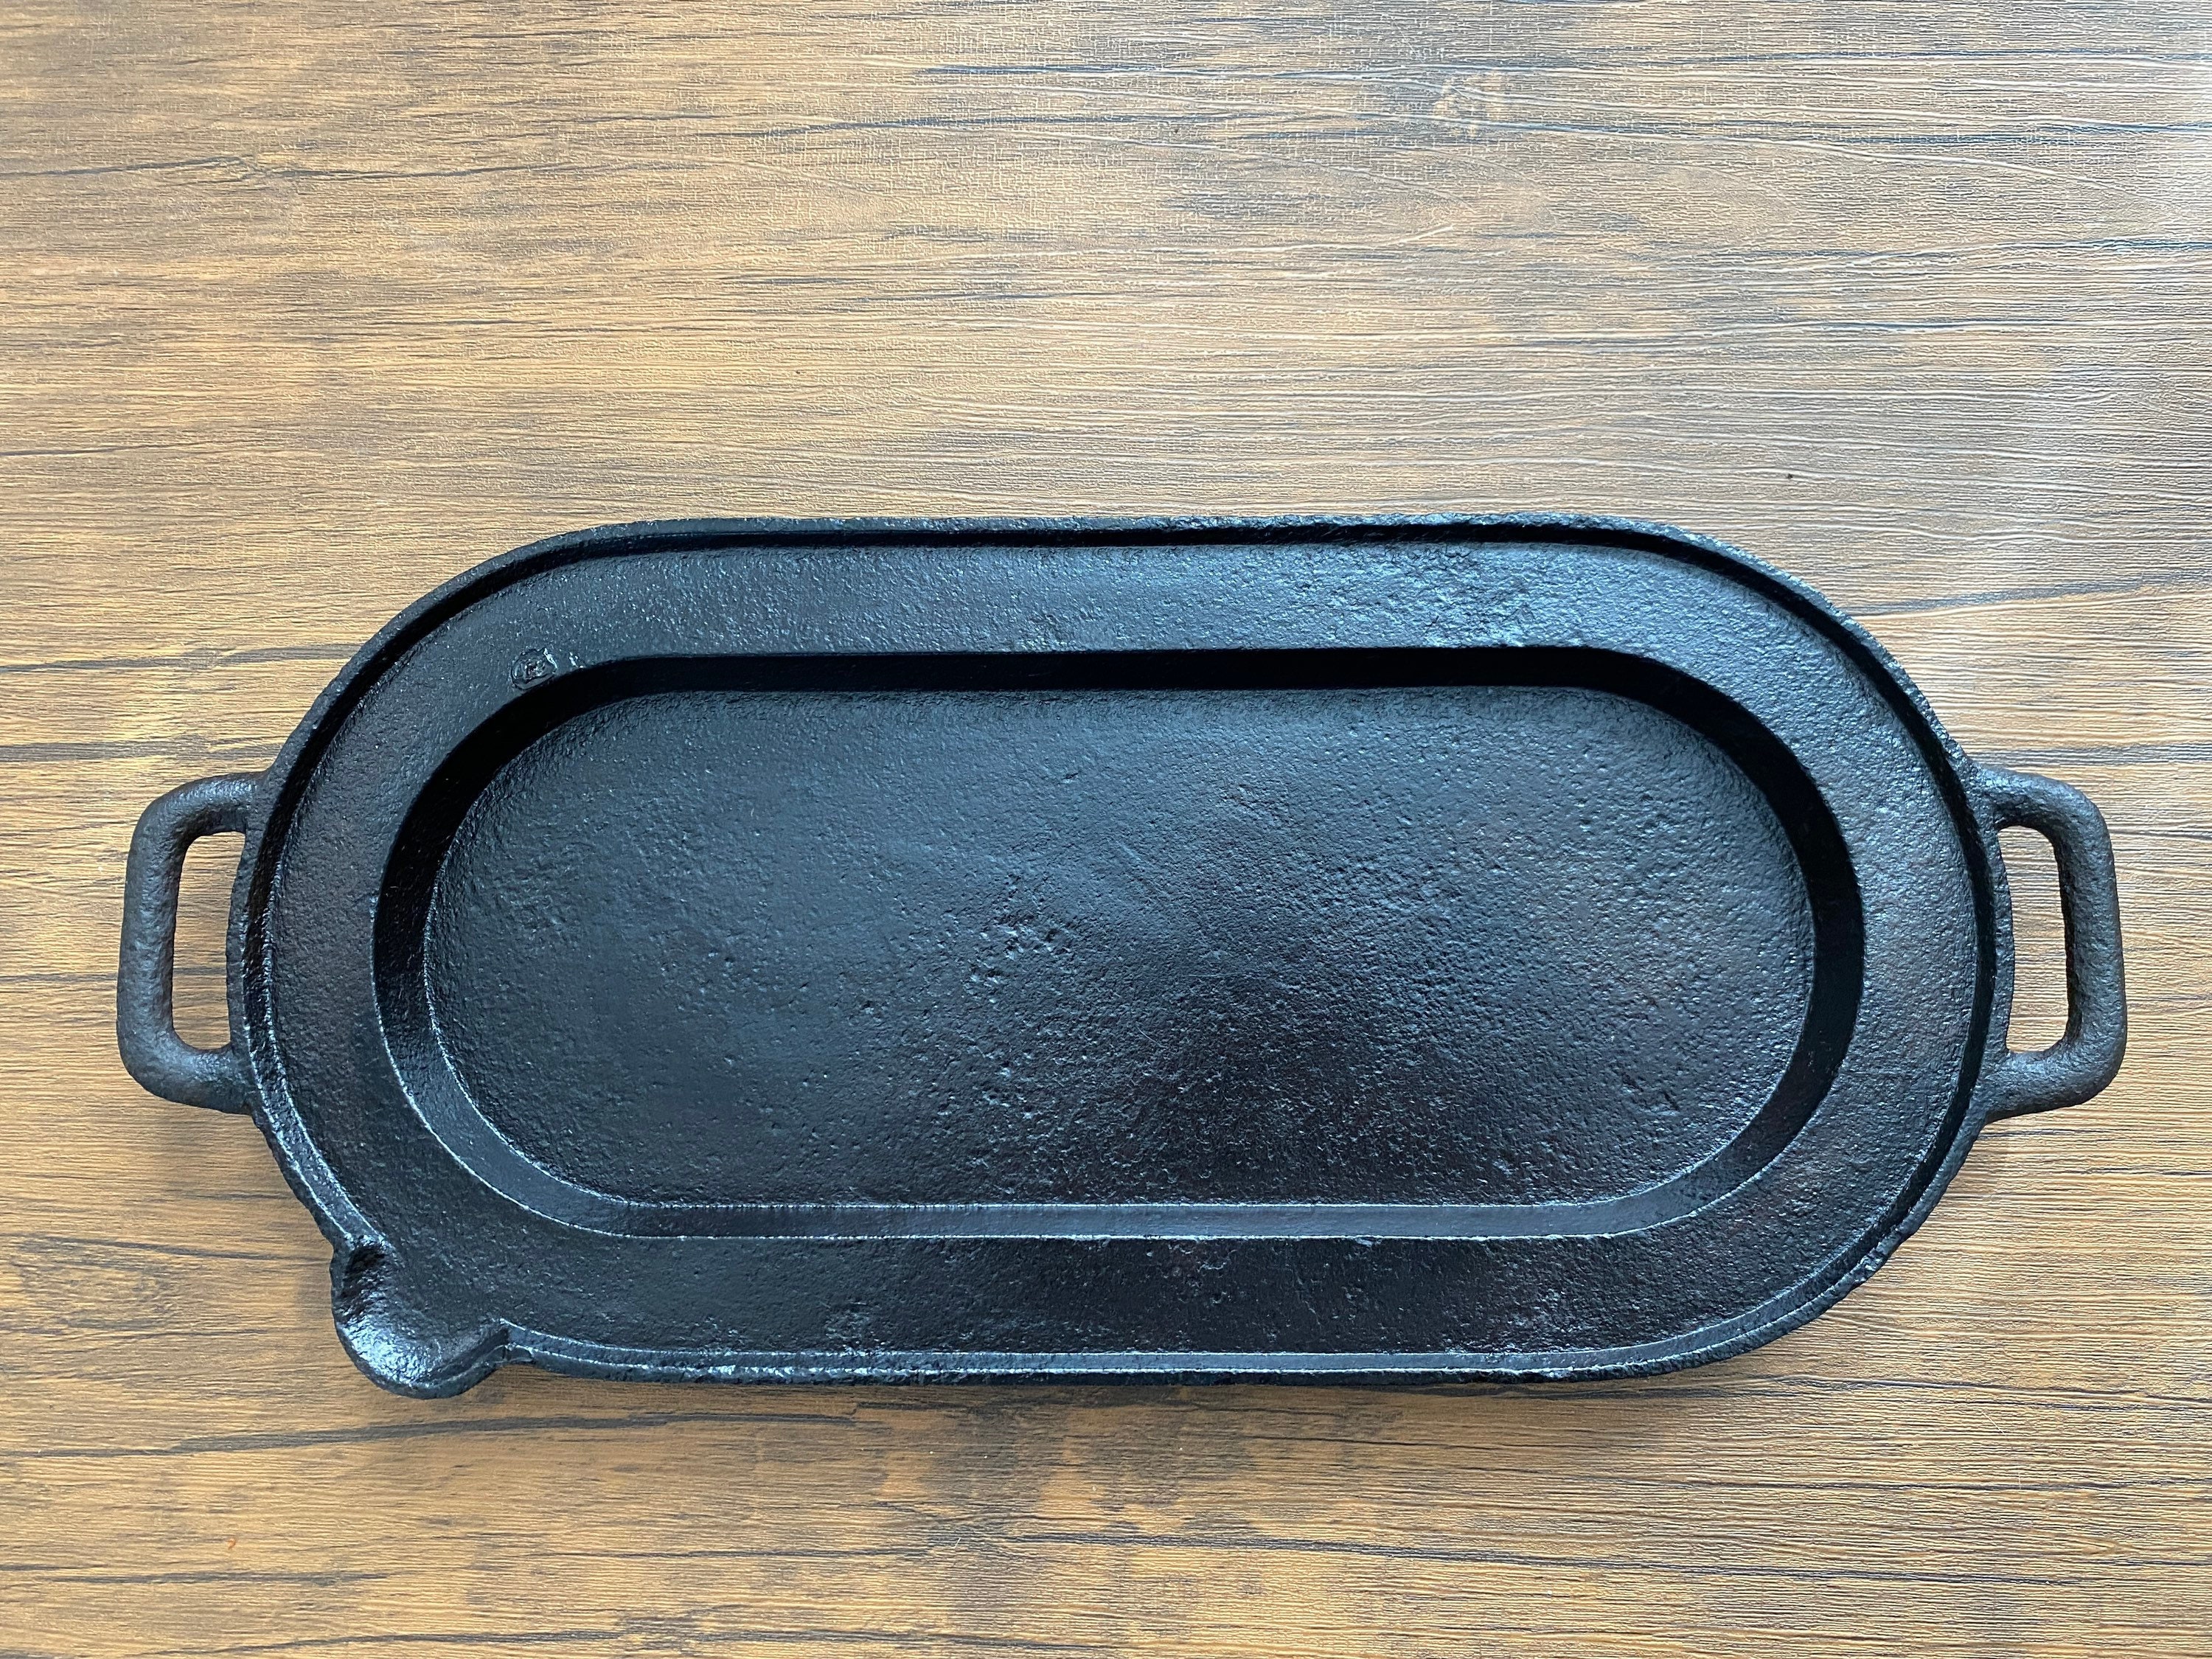 Sold at Auction: Stove Range 3052 Cast Iron Oval Fish Fryer Pan